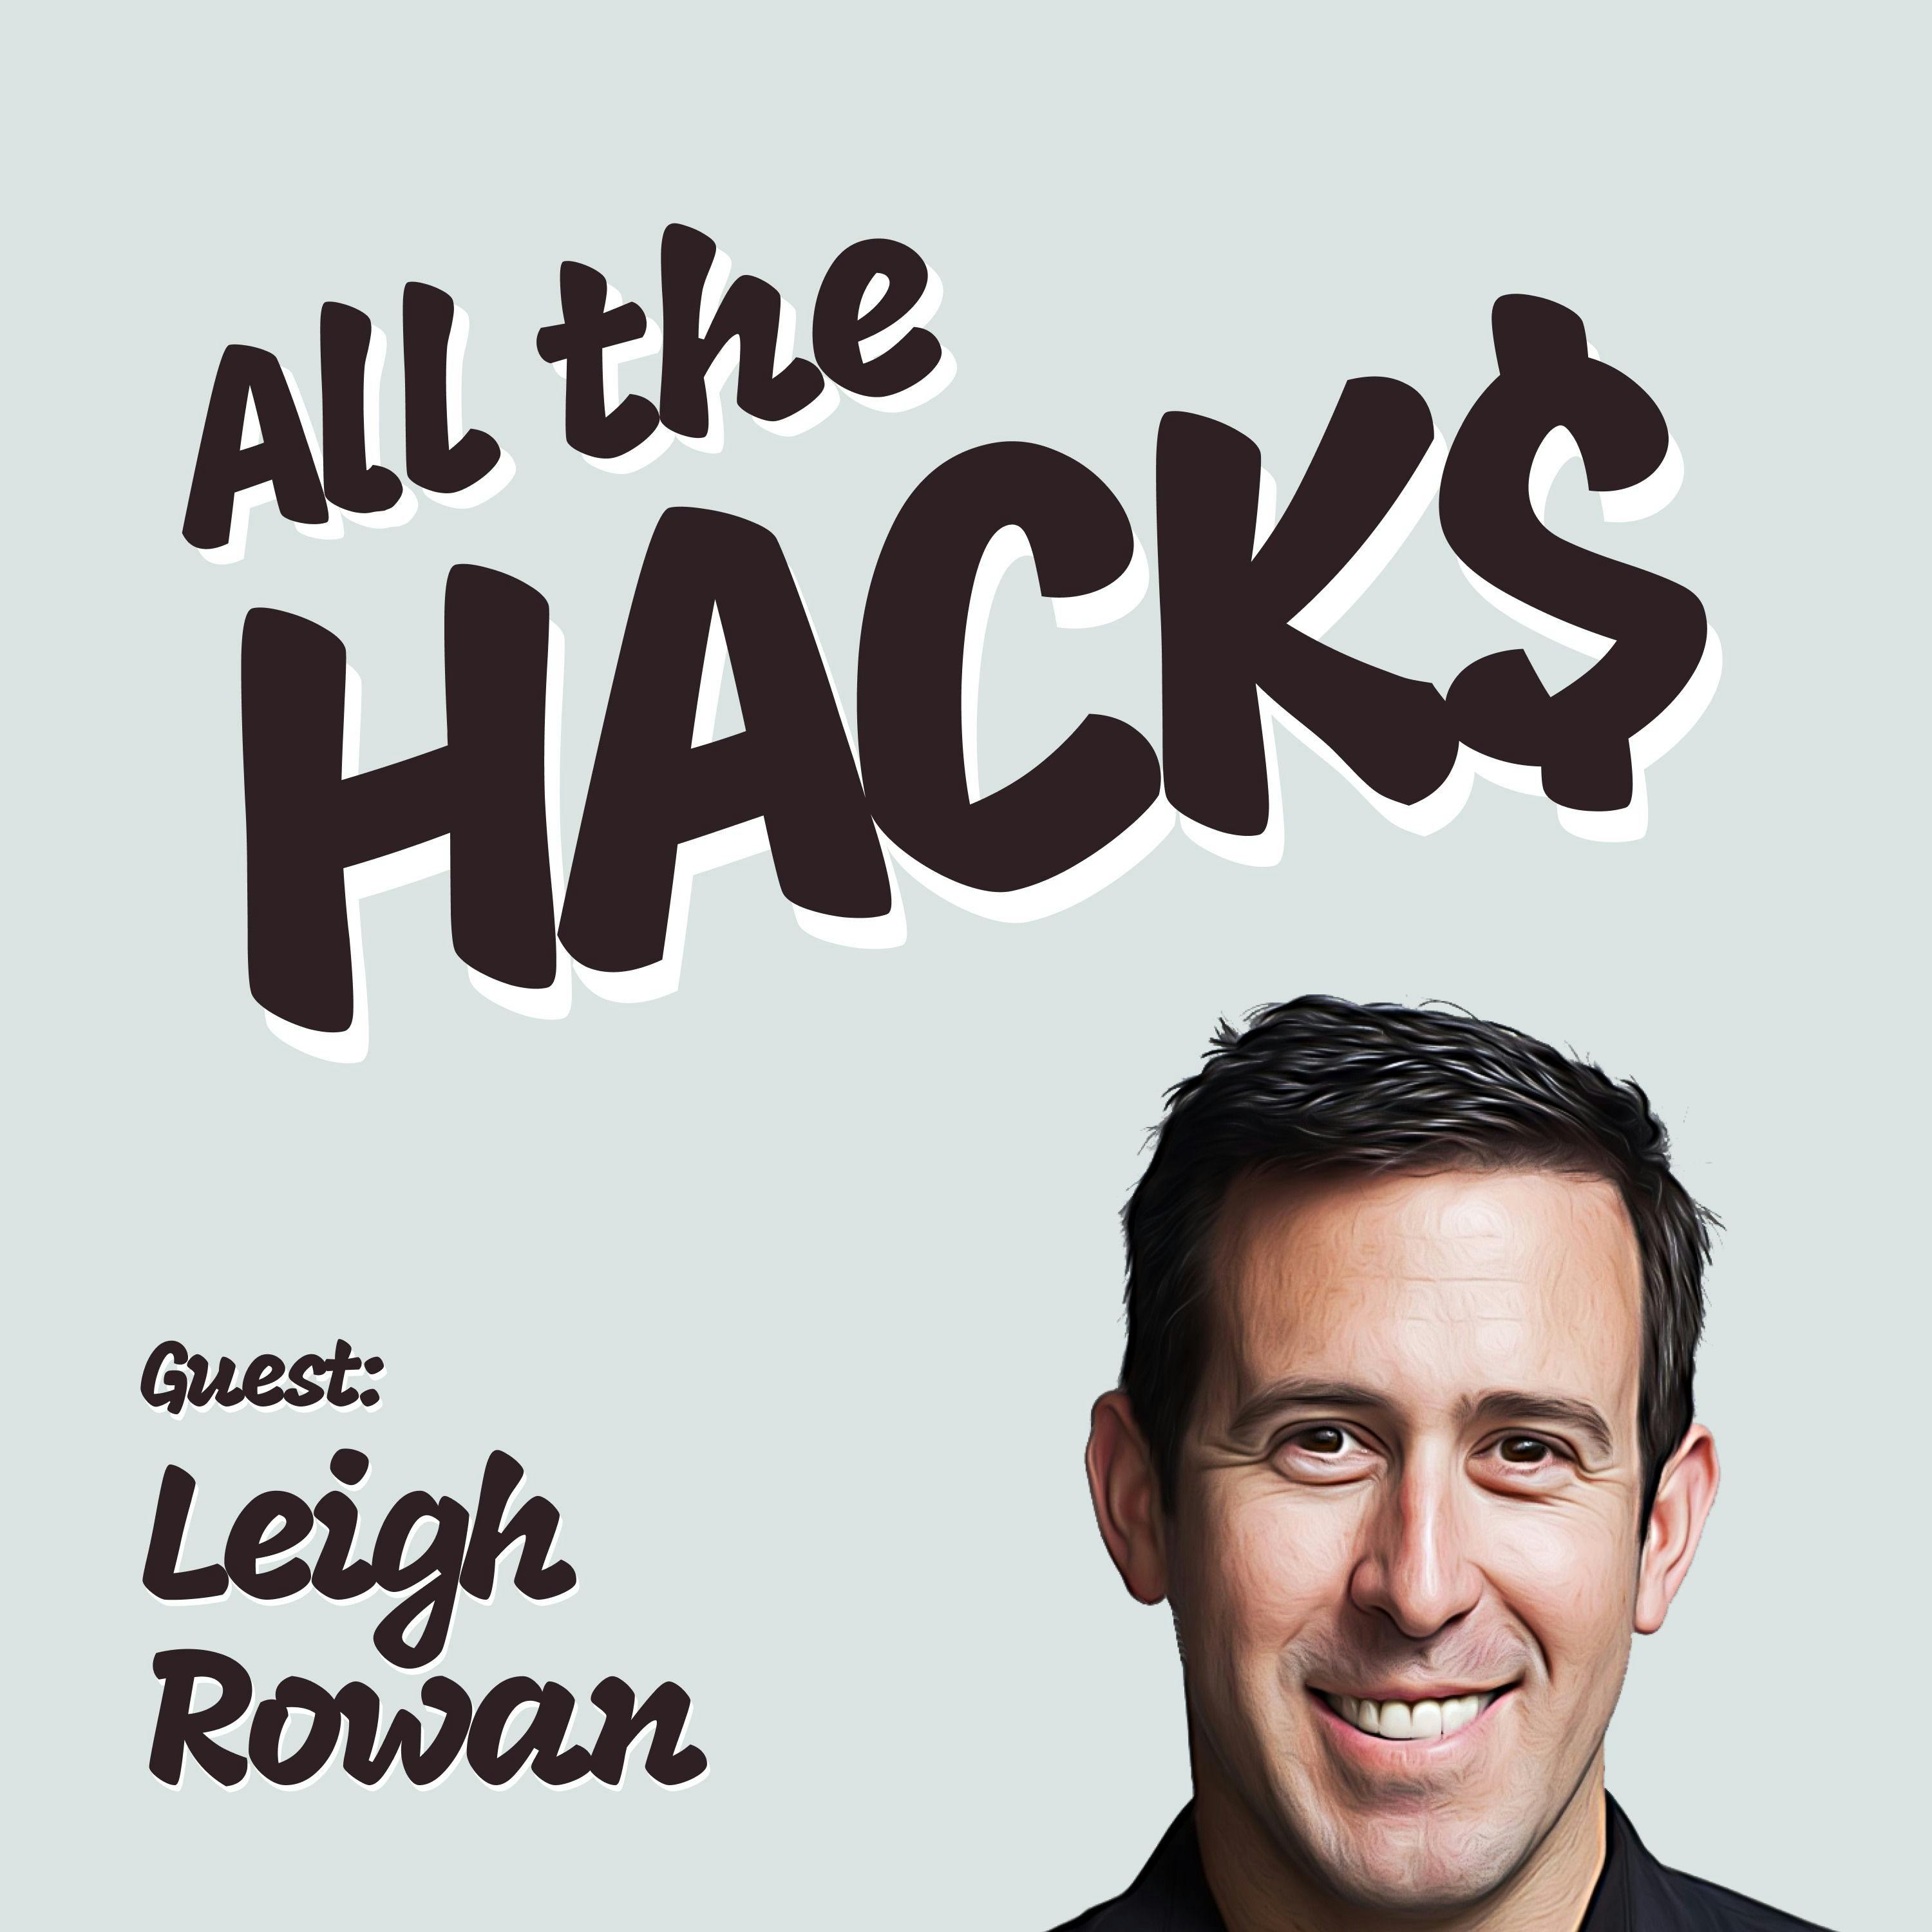 Pro Travel Hacks for Every Aspect of Your Next Trip with Leigh Rowan